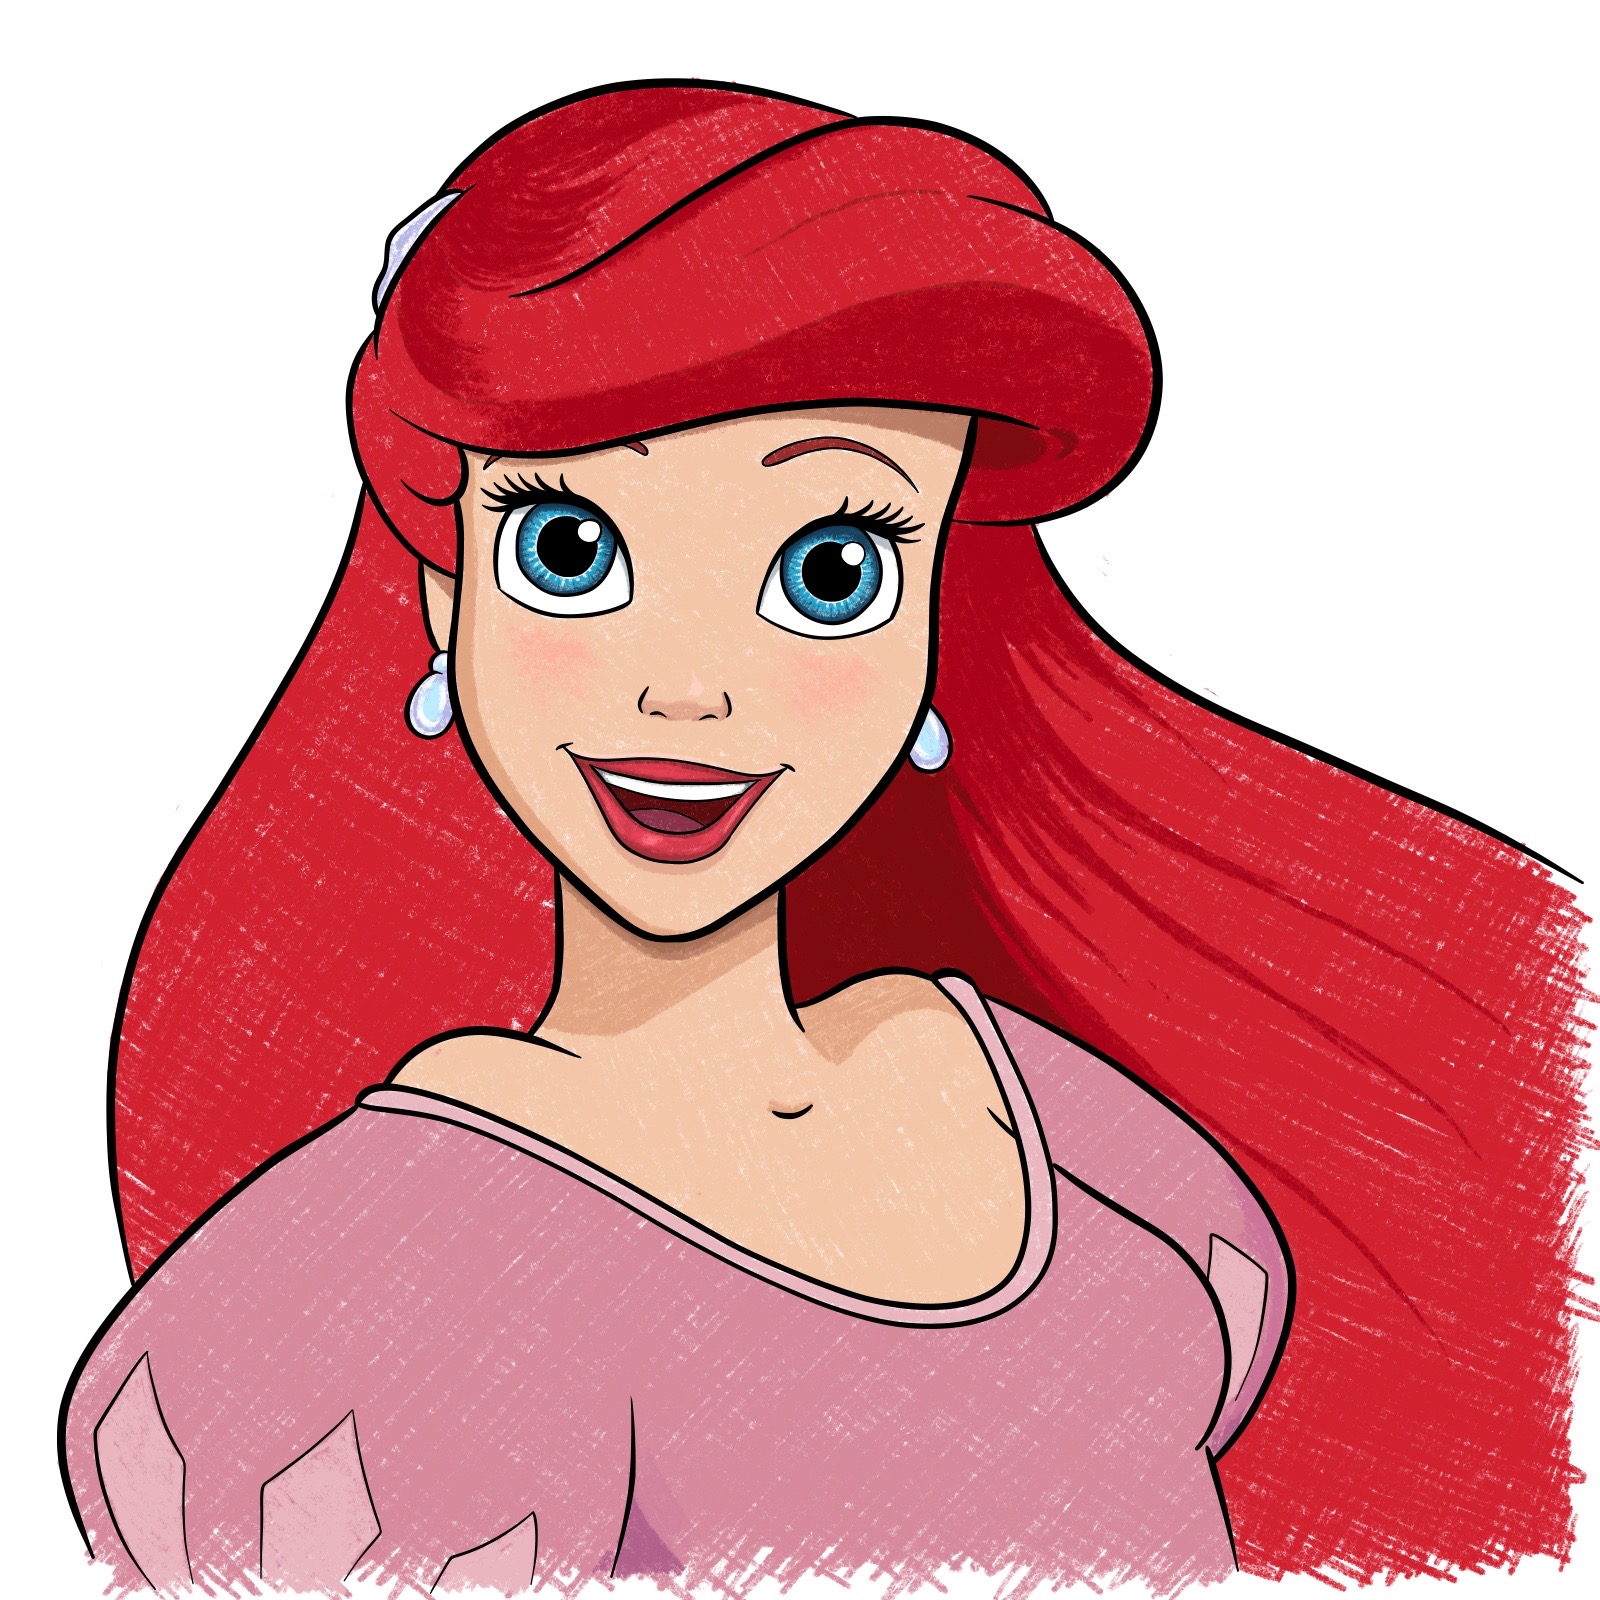 How to draw Ariel's face - The Little Mermaid - step 40